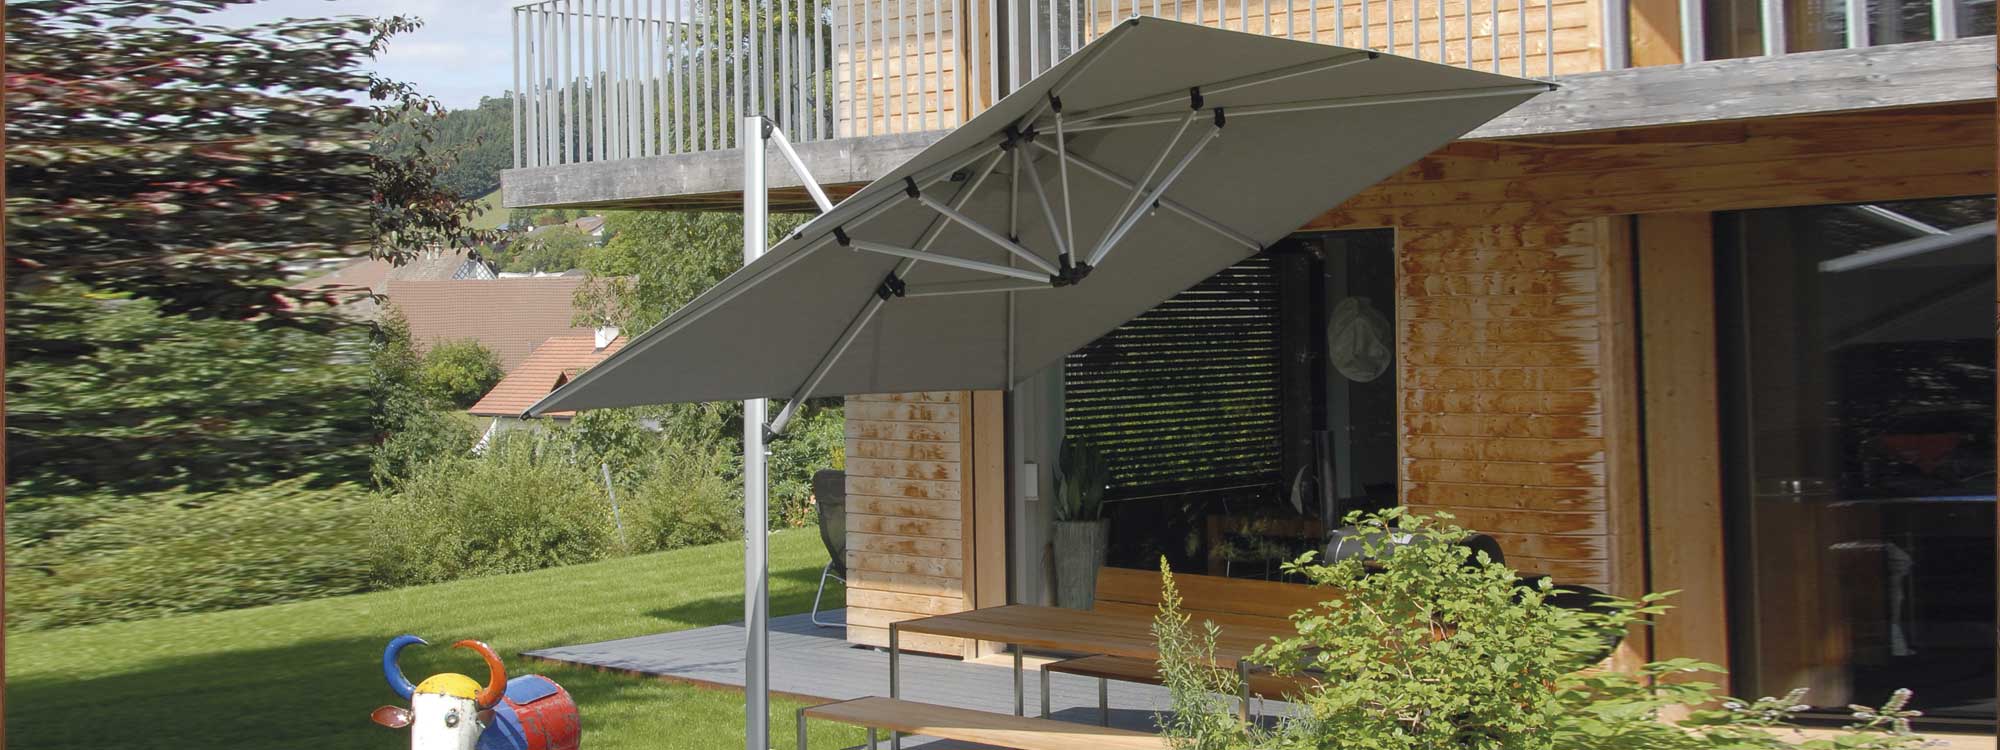 Sirius cantilever parasol is a tilting and revolving sunshade in marine grade parasol materials by Shademaker high quality parasol company.